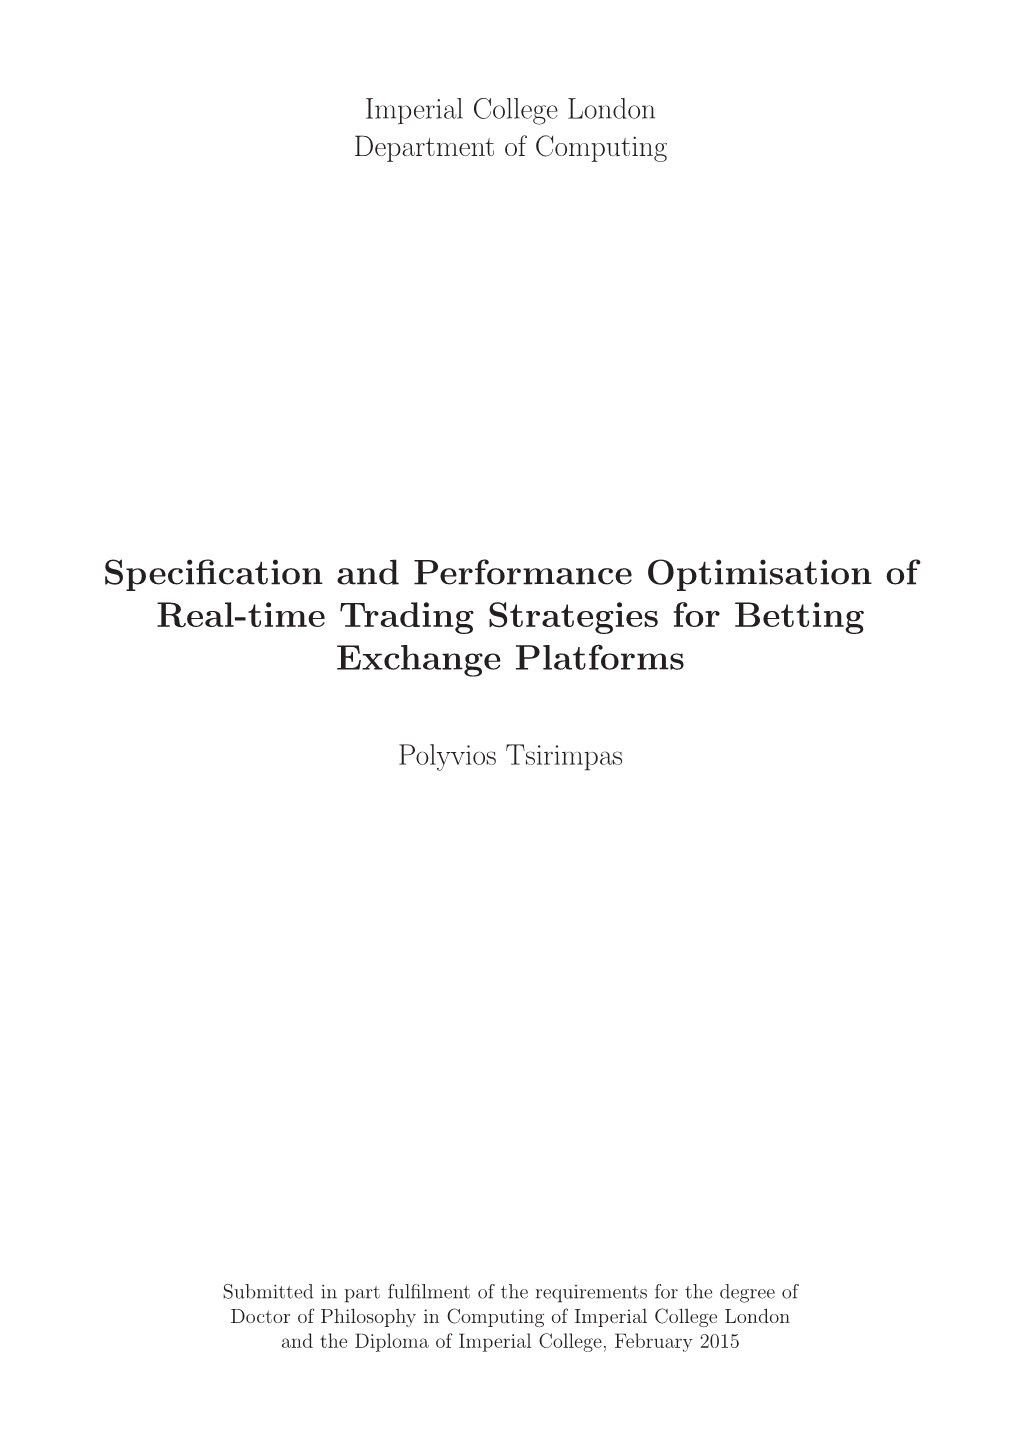 Specification and Performance Optimisation of Real-Time Trading